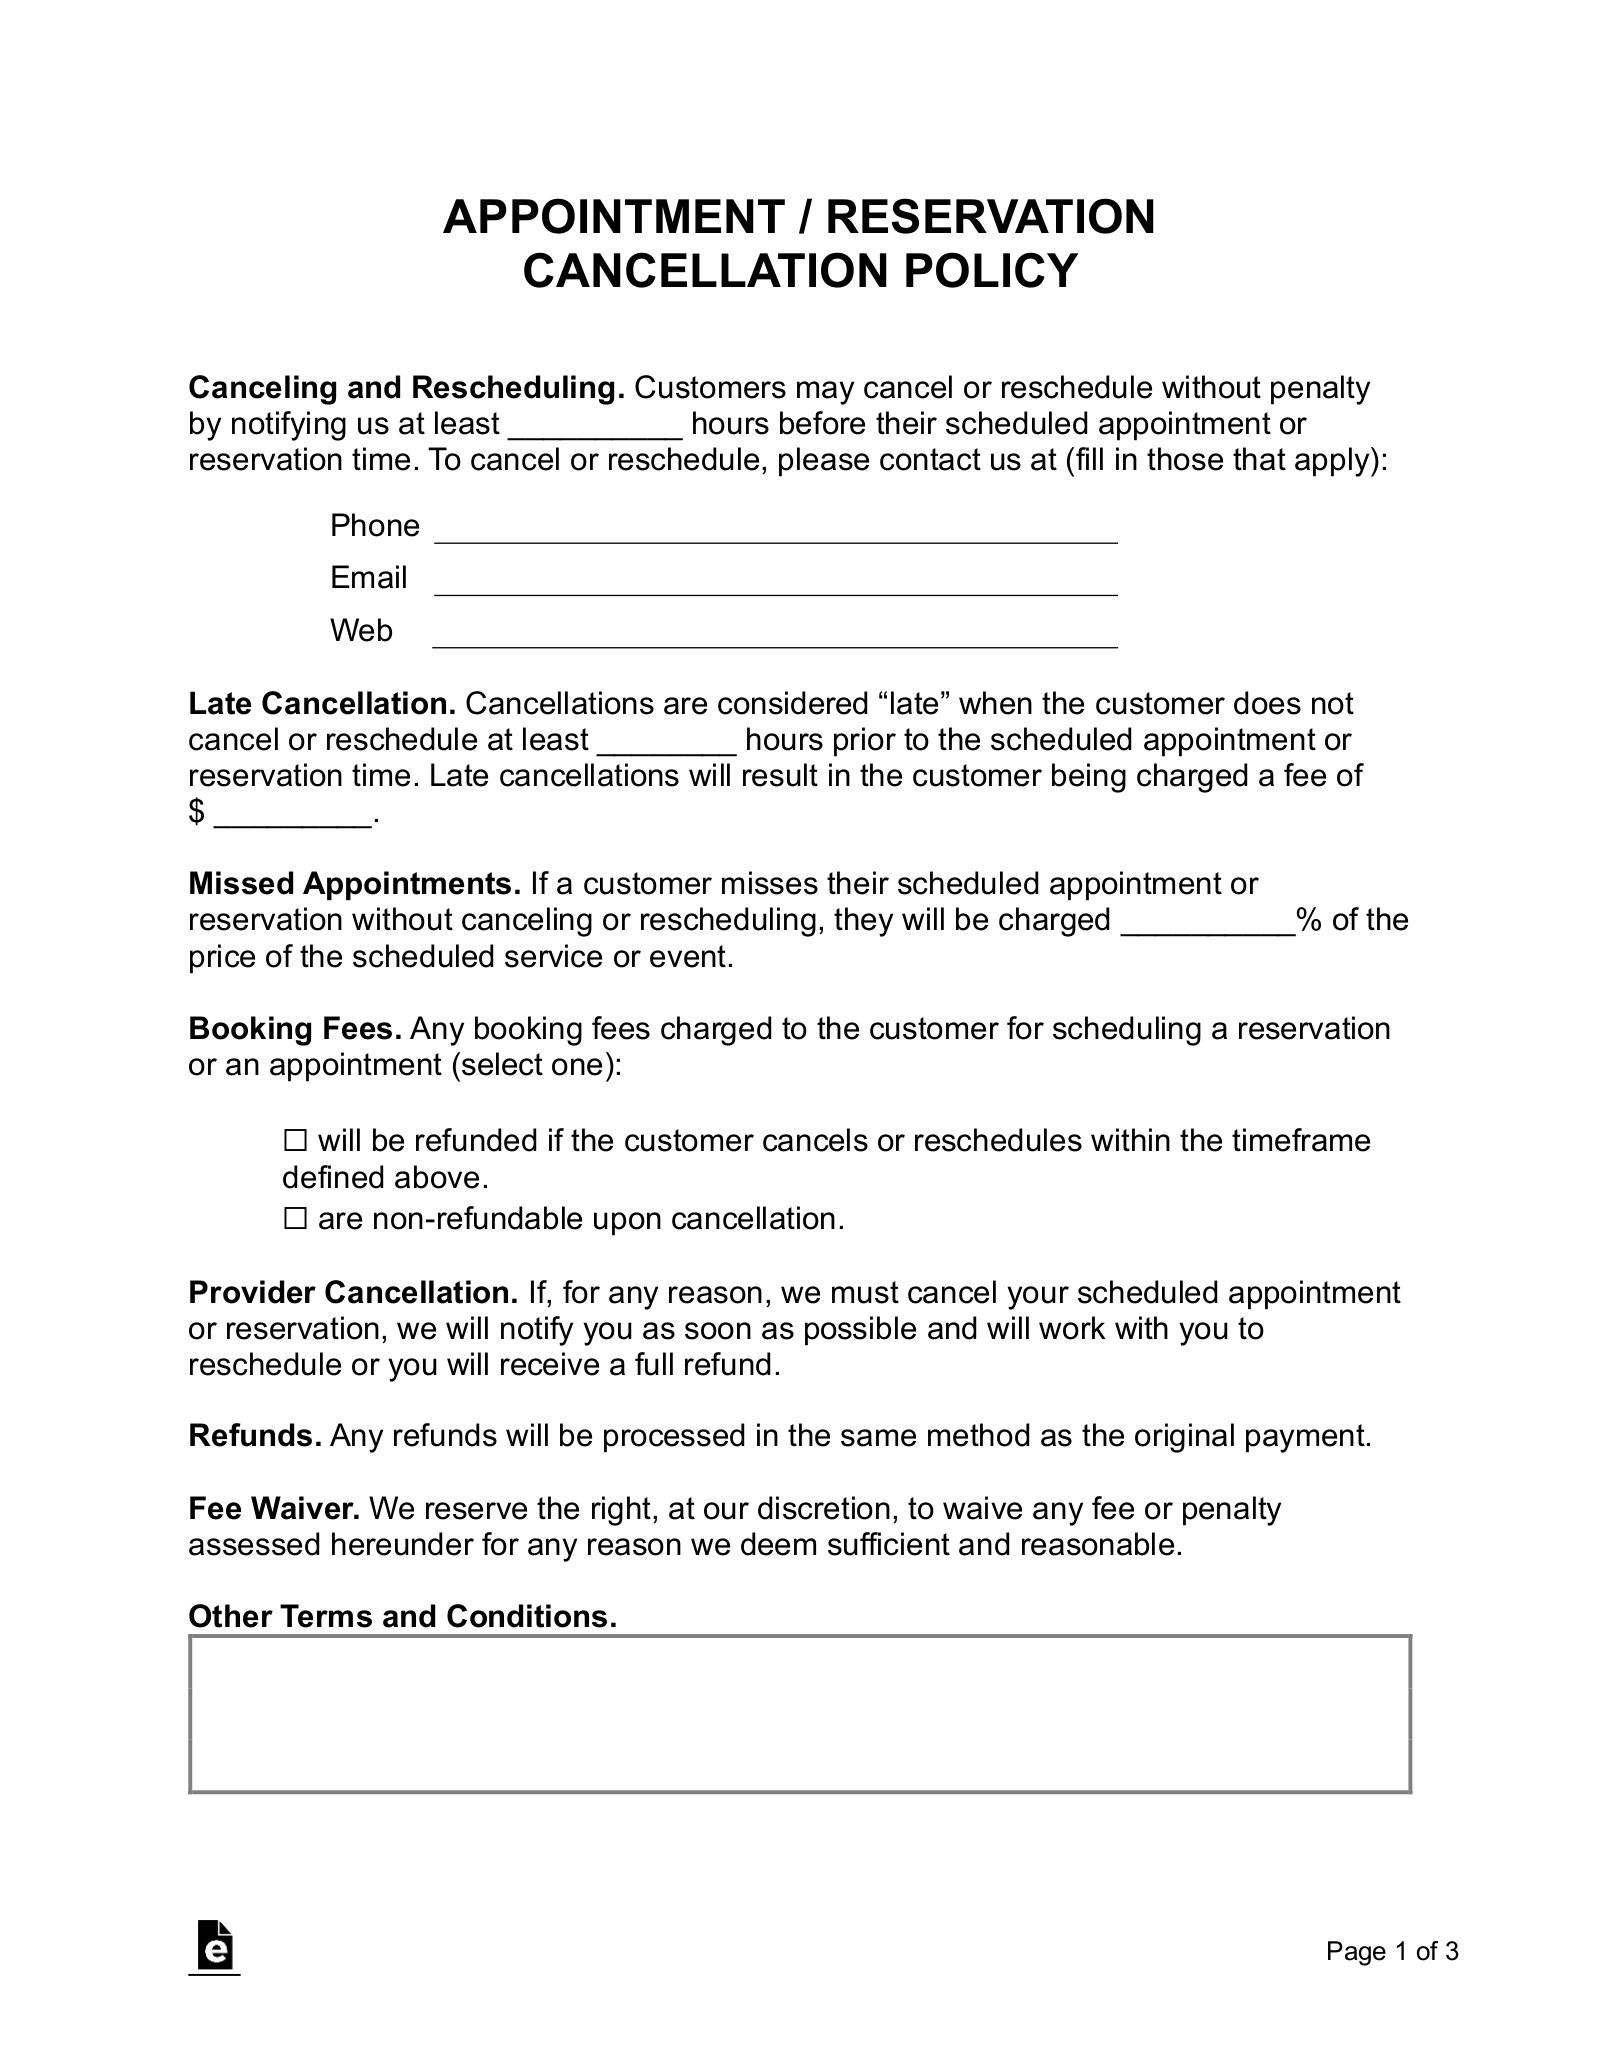 travellers autobarn cancellation policy